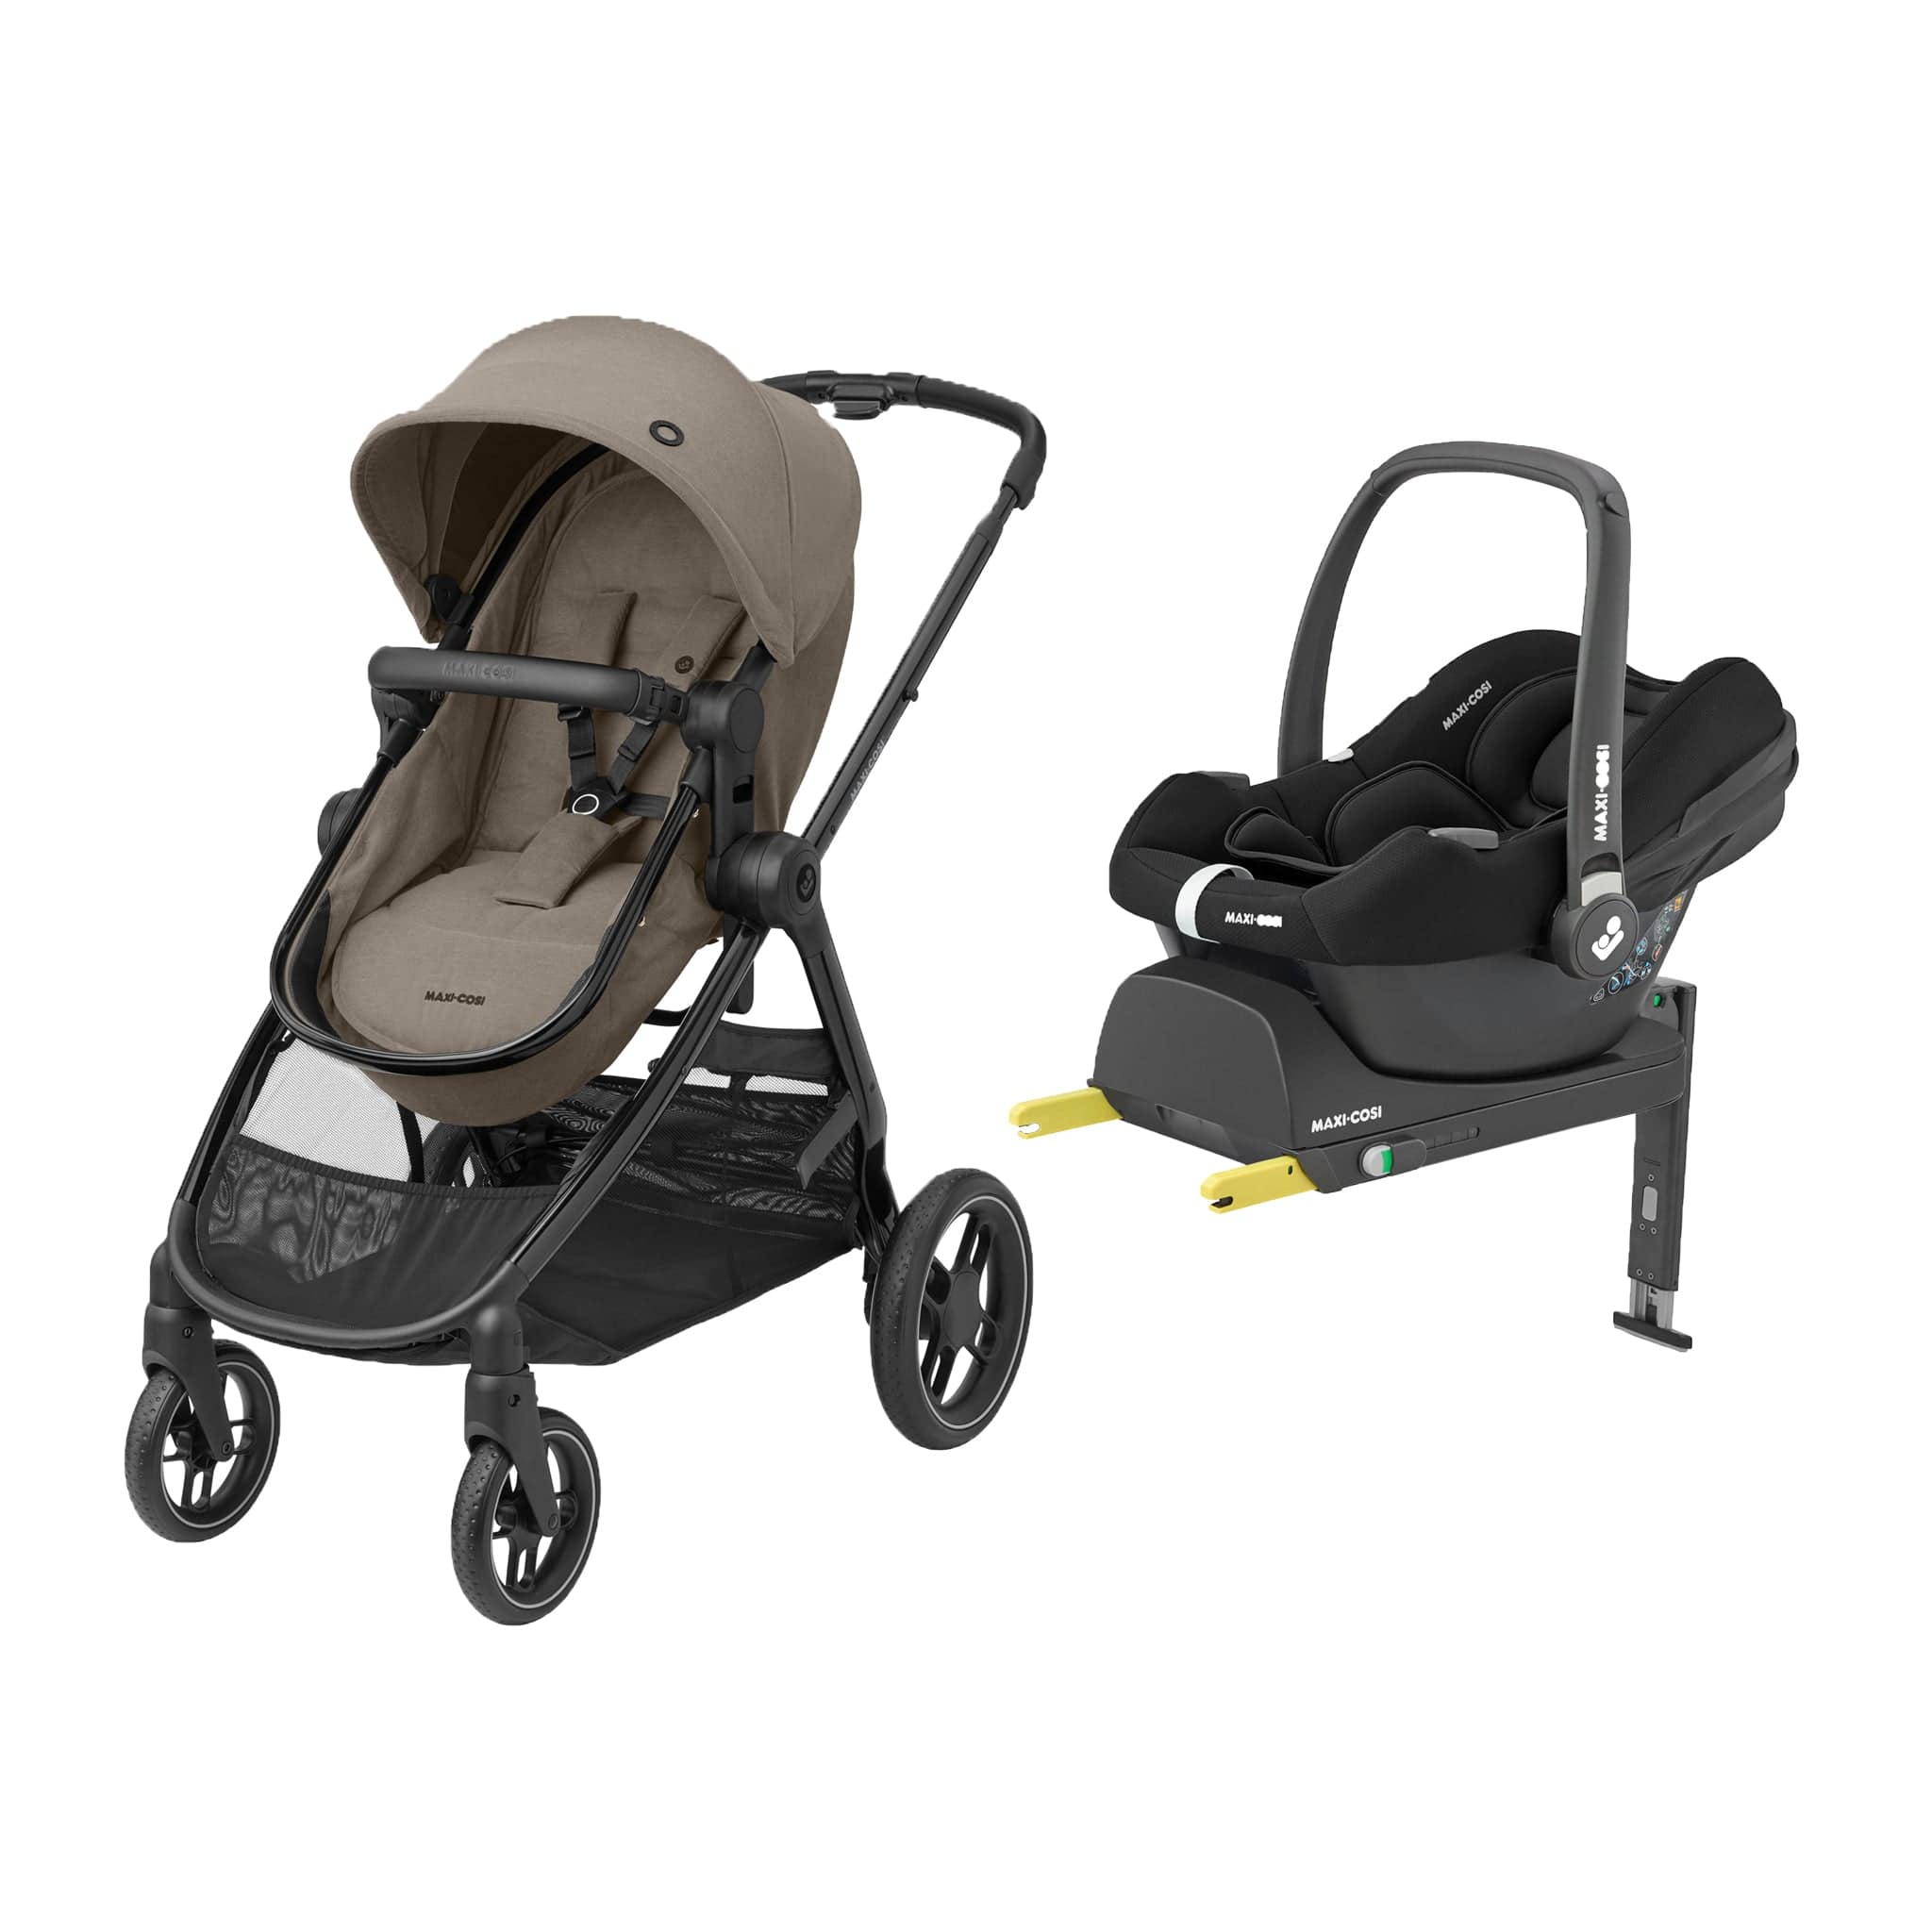 Maxi-Cosi travel systems Maxi-Cosi Zelia Luxe with Cabriofix i-Size & Base Travel System in Twillic Truffle